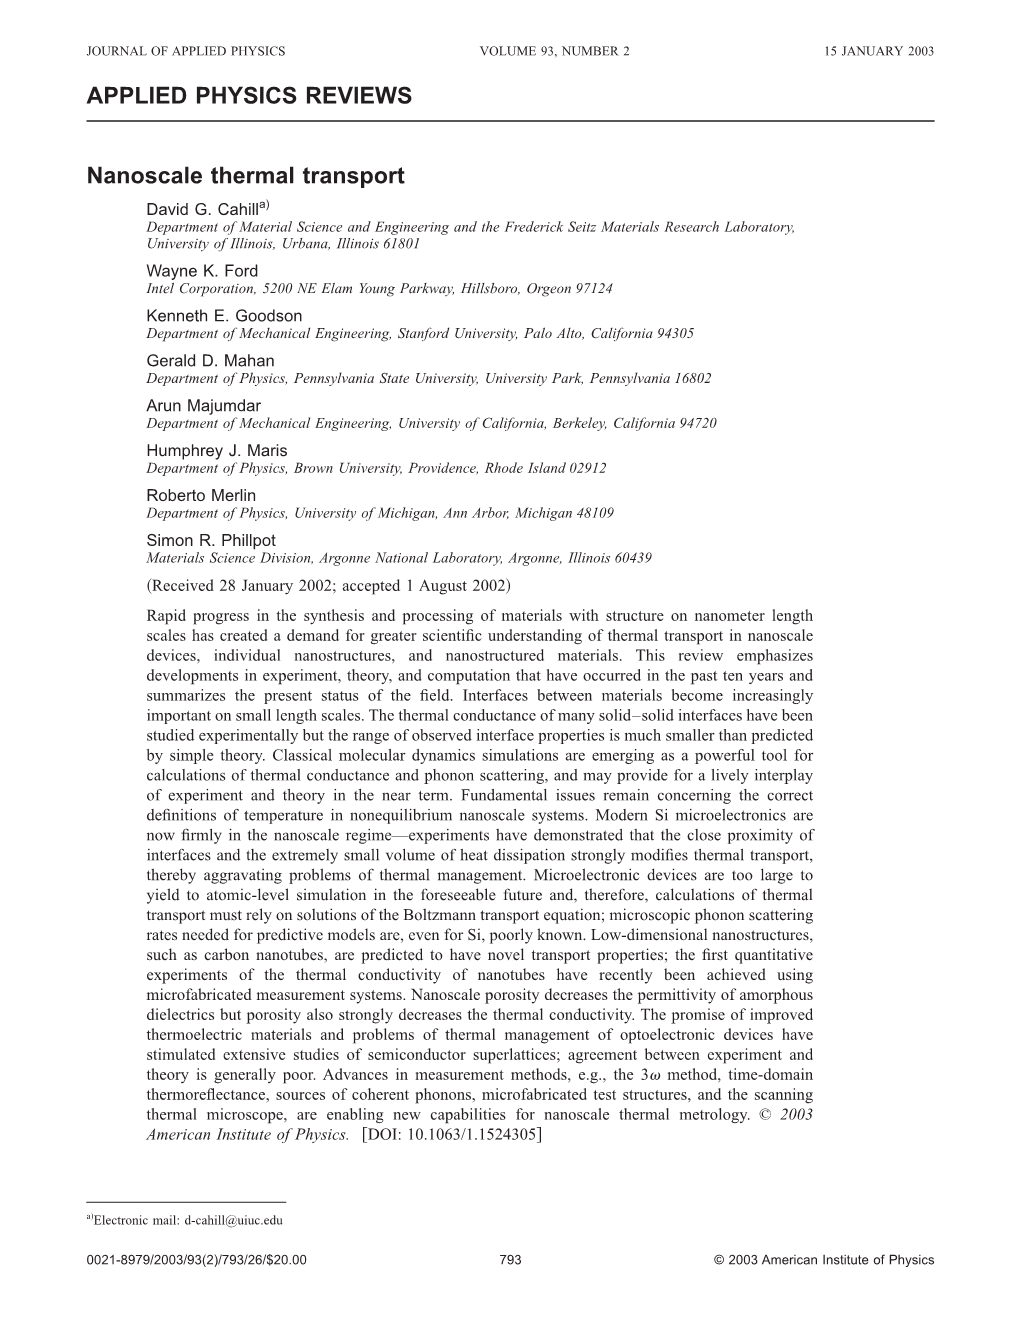 APPLIED PHYSICS REVIEWS Nanoscale Thermal Transport